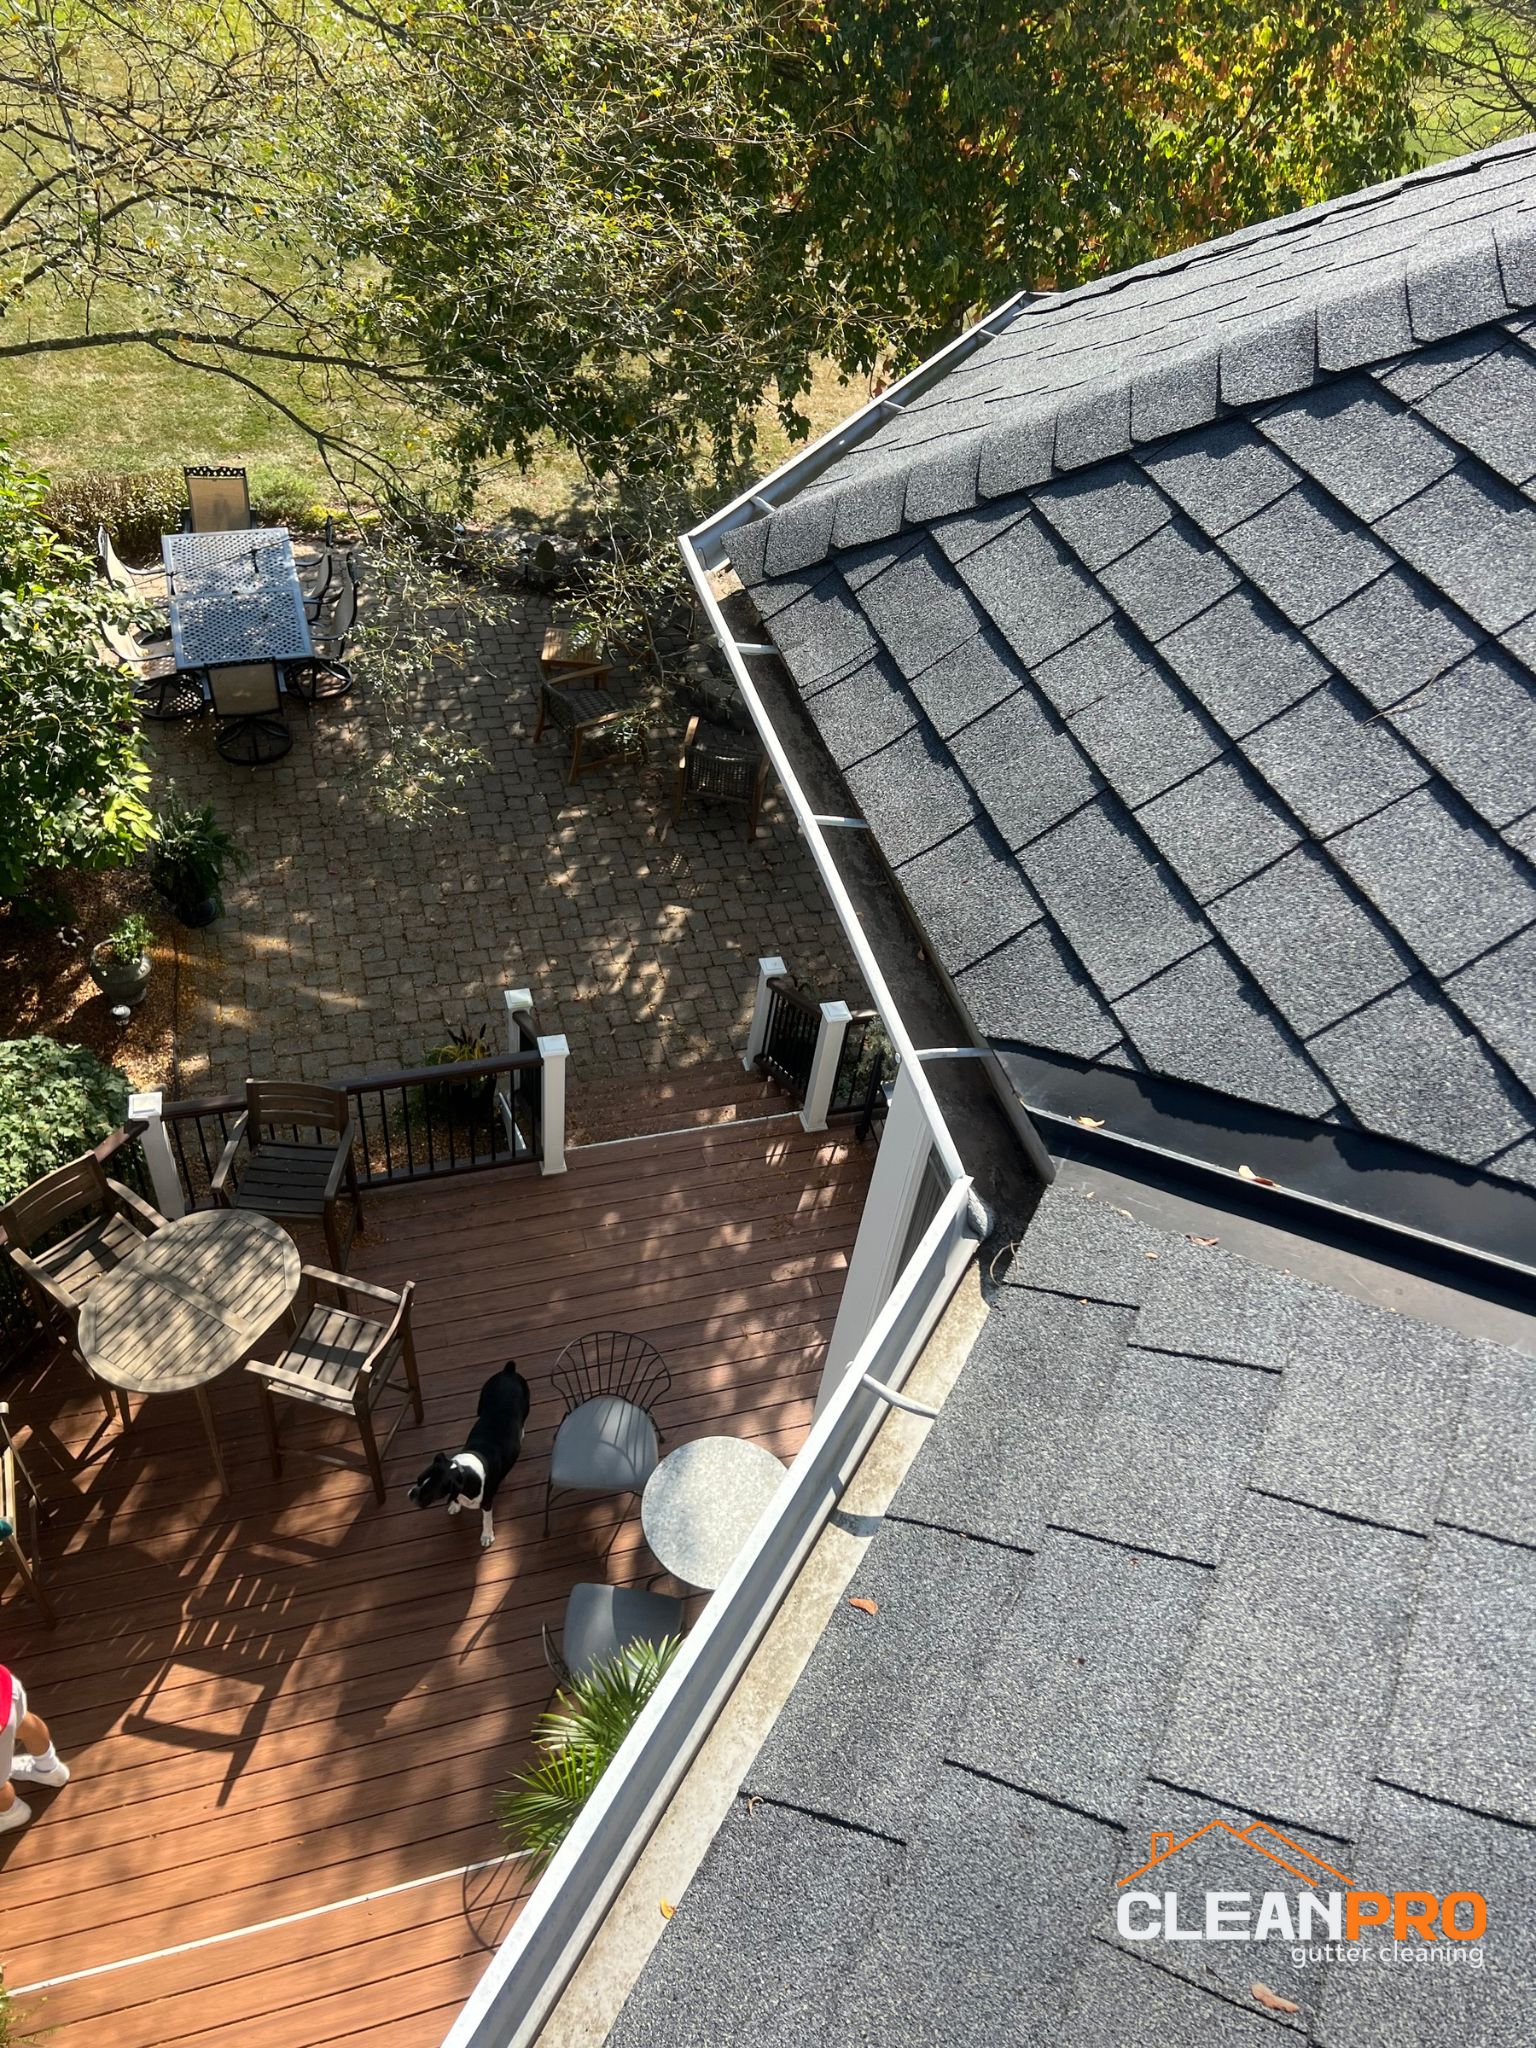 Quality Gutter Cleaning in Richmond VA